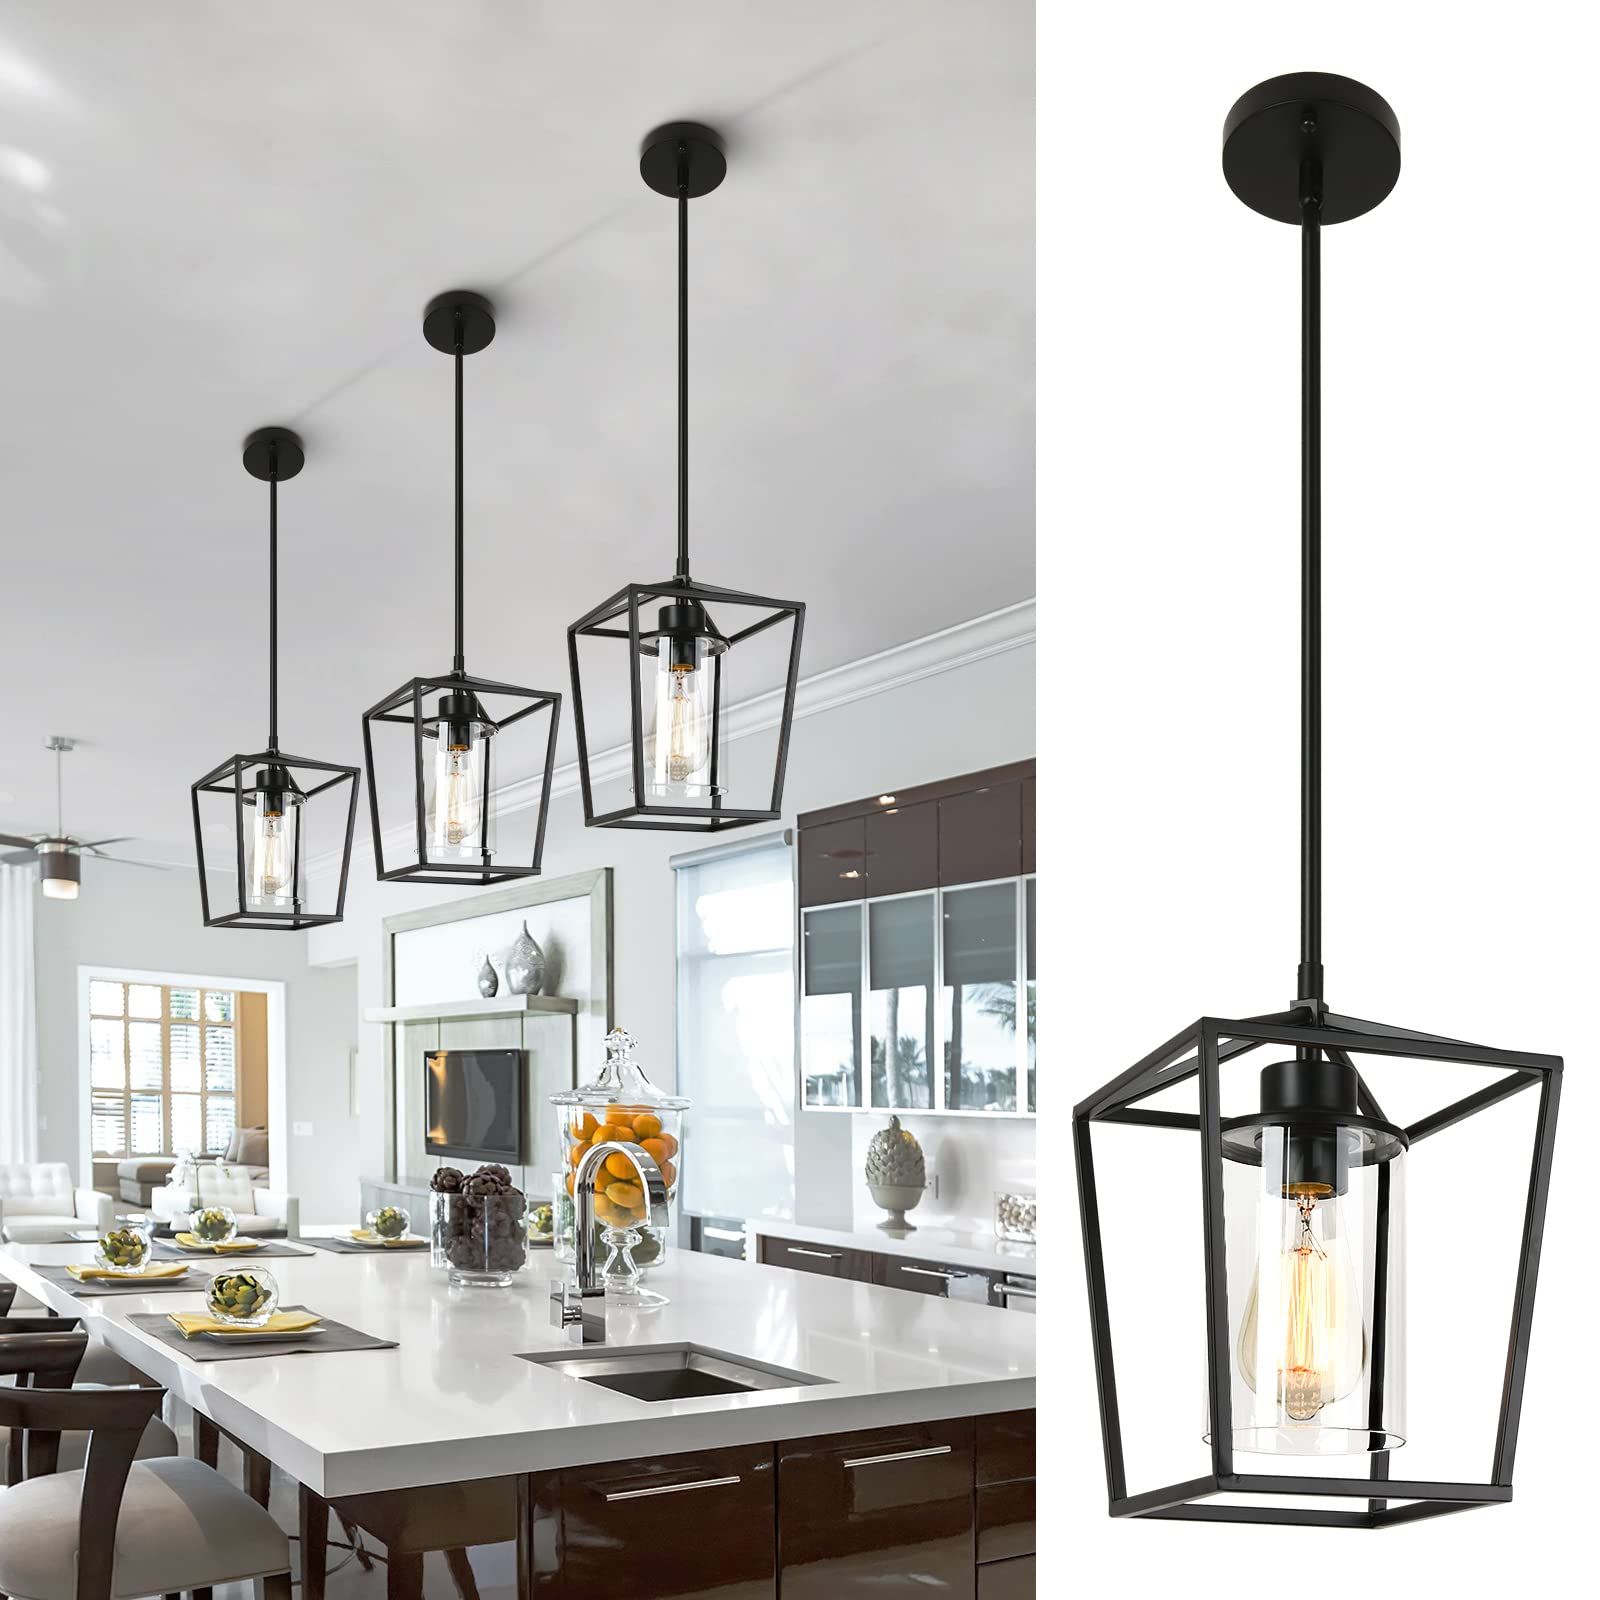 Most Recent 1 Light Black Pendant Light Fixture Farmhouse Iron Cage Metal Pendant Light  Lantern Hanging Light Fixtures With Clear Glass Shade For Kitchen Island,  Entryway, Dining Room, Hallway – – Amazon Pertaining To Cage Metal Shade Lantern Chandeliers (View 4 of 10)